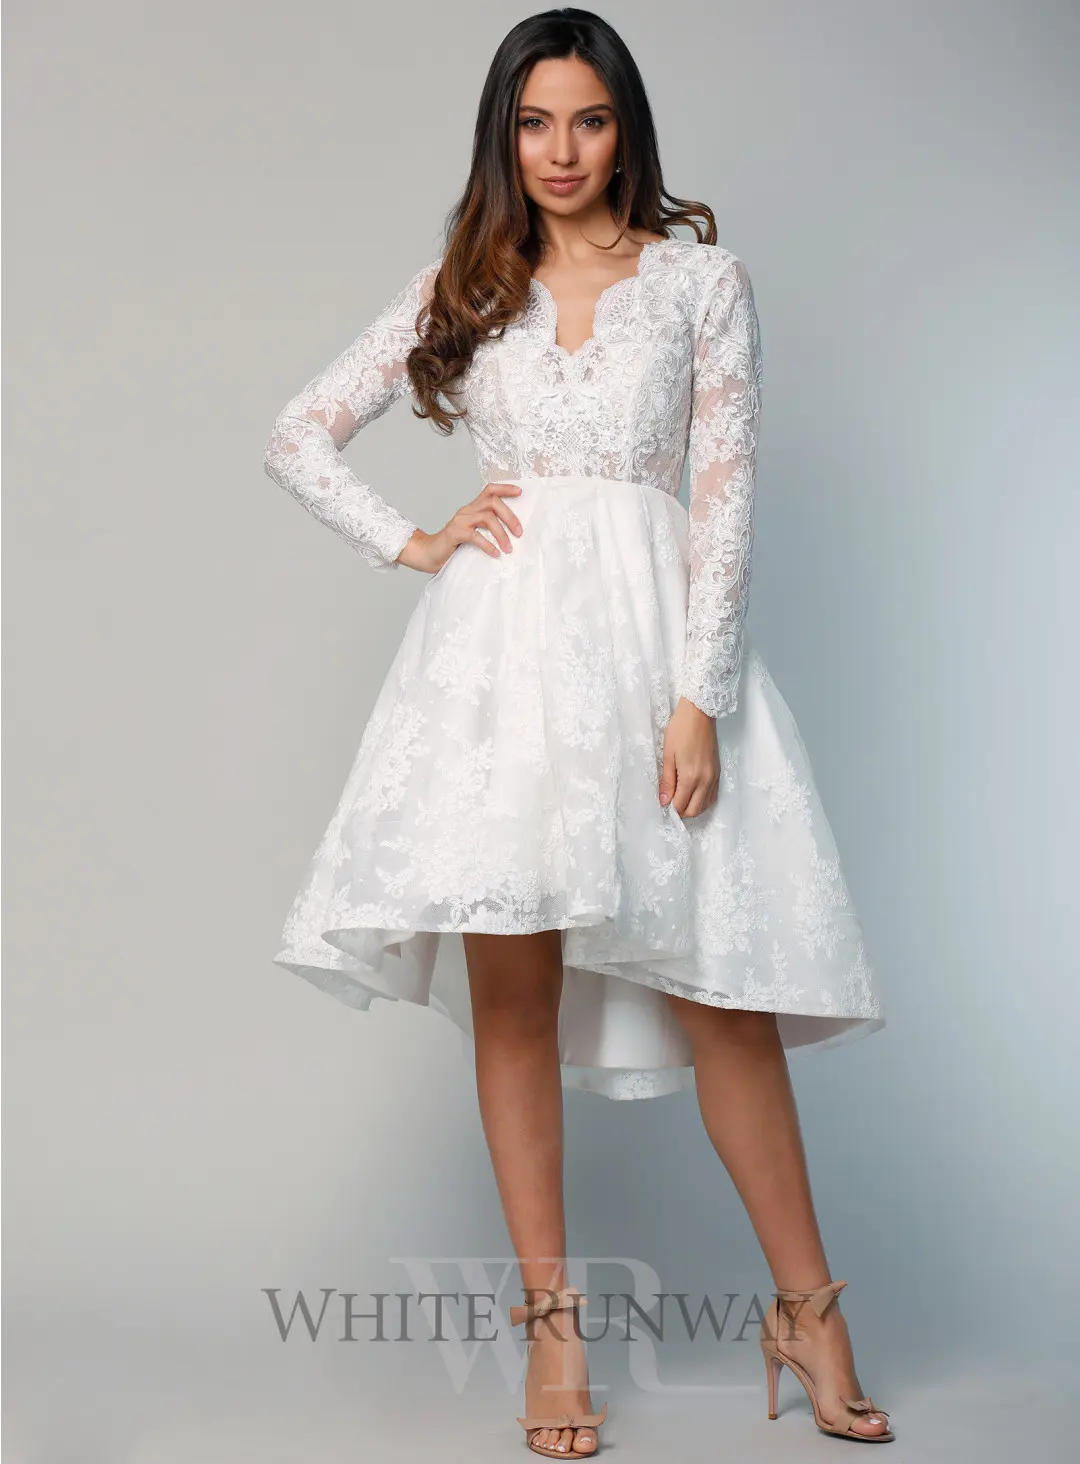 2020 Long Prom Dress Custom Design V-neck Style Featuring Lace Long Sleeves Bridesmaid Dress